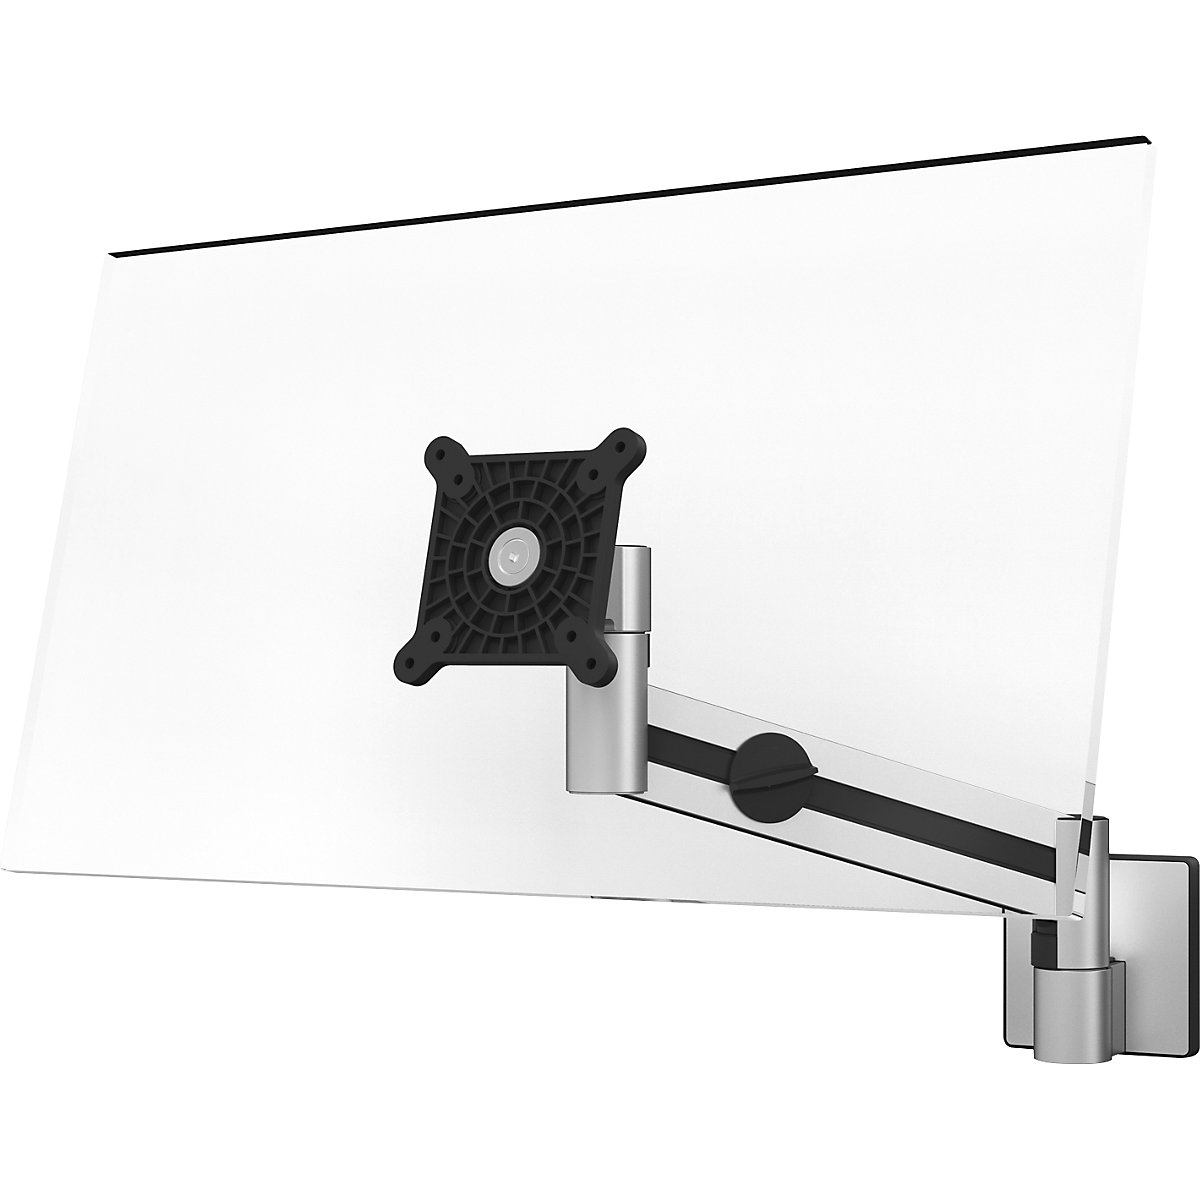 Monitor wall mounting bracket with arm for 1 monitor – DURABLE HxWxD 350 x  290 x 120 mm